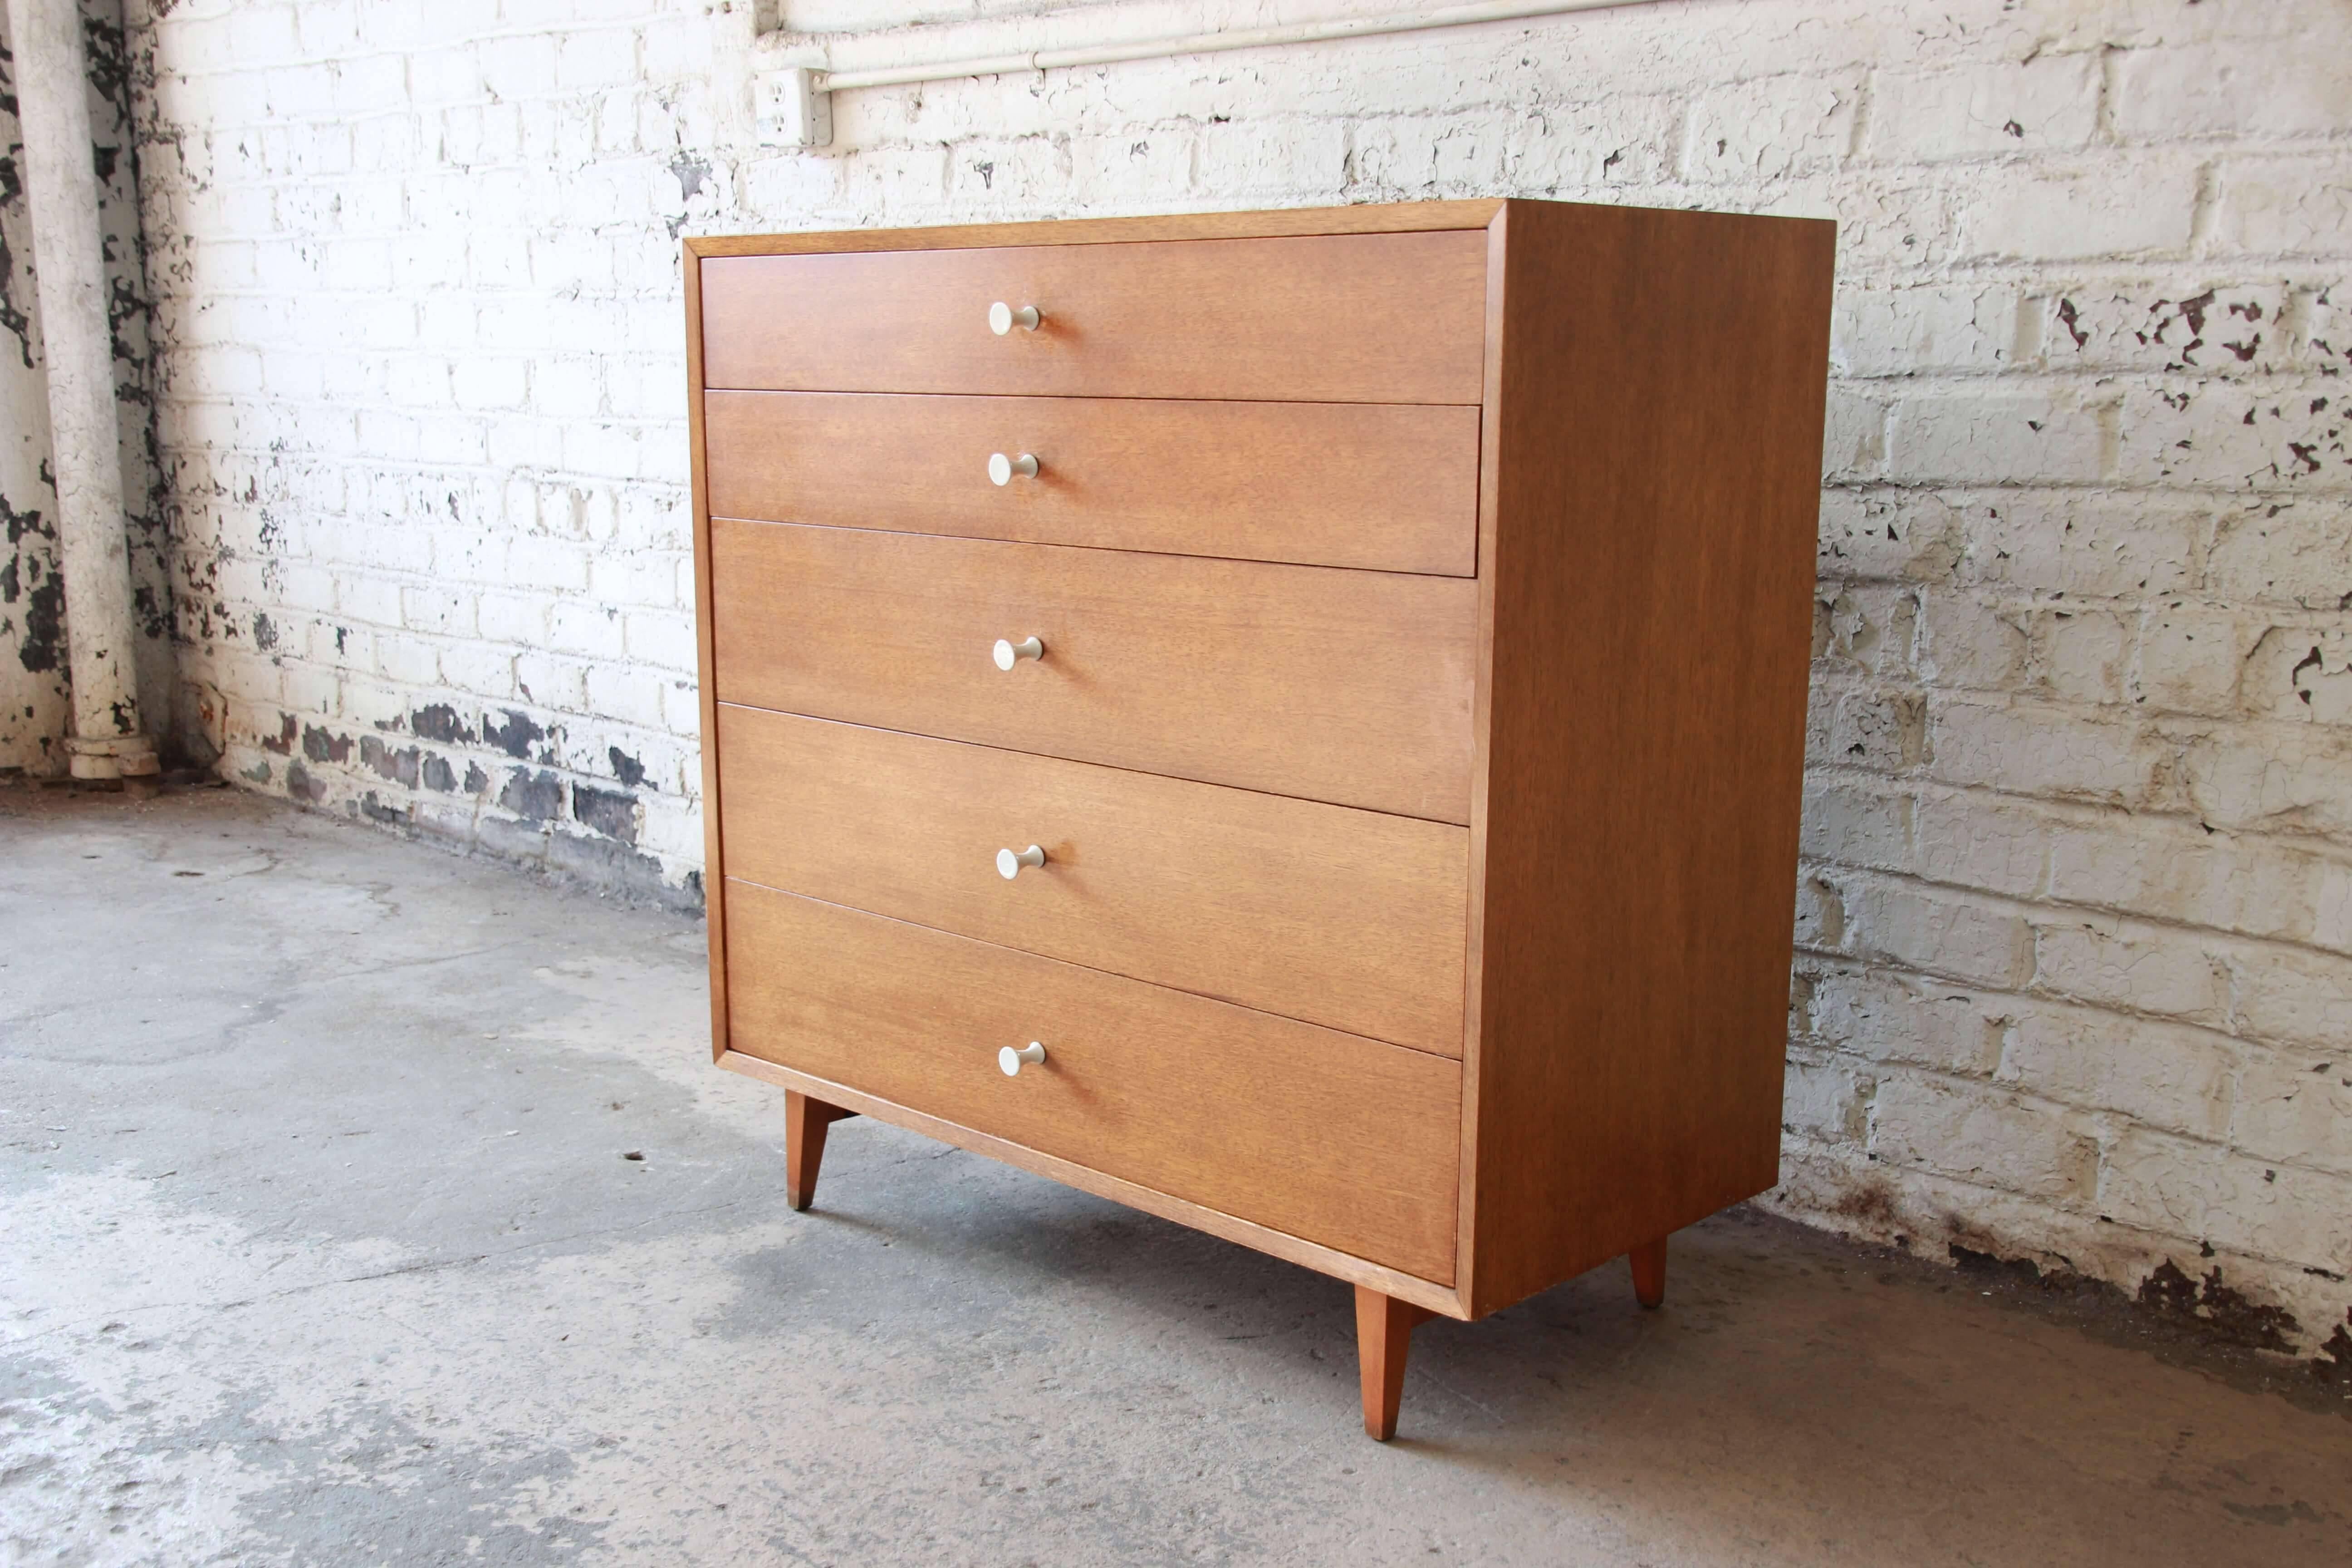 Offering a gorgeous mid-century modern highboy dresser designed by George Nelson for Herman Miller. The dresser features five graduated drawers that open and close smoothly with original porcelain pulls. The mahogany dresser has clean modern lines